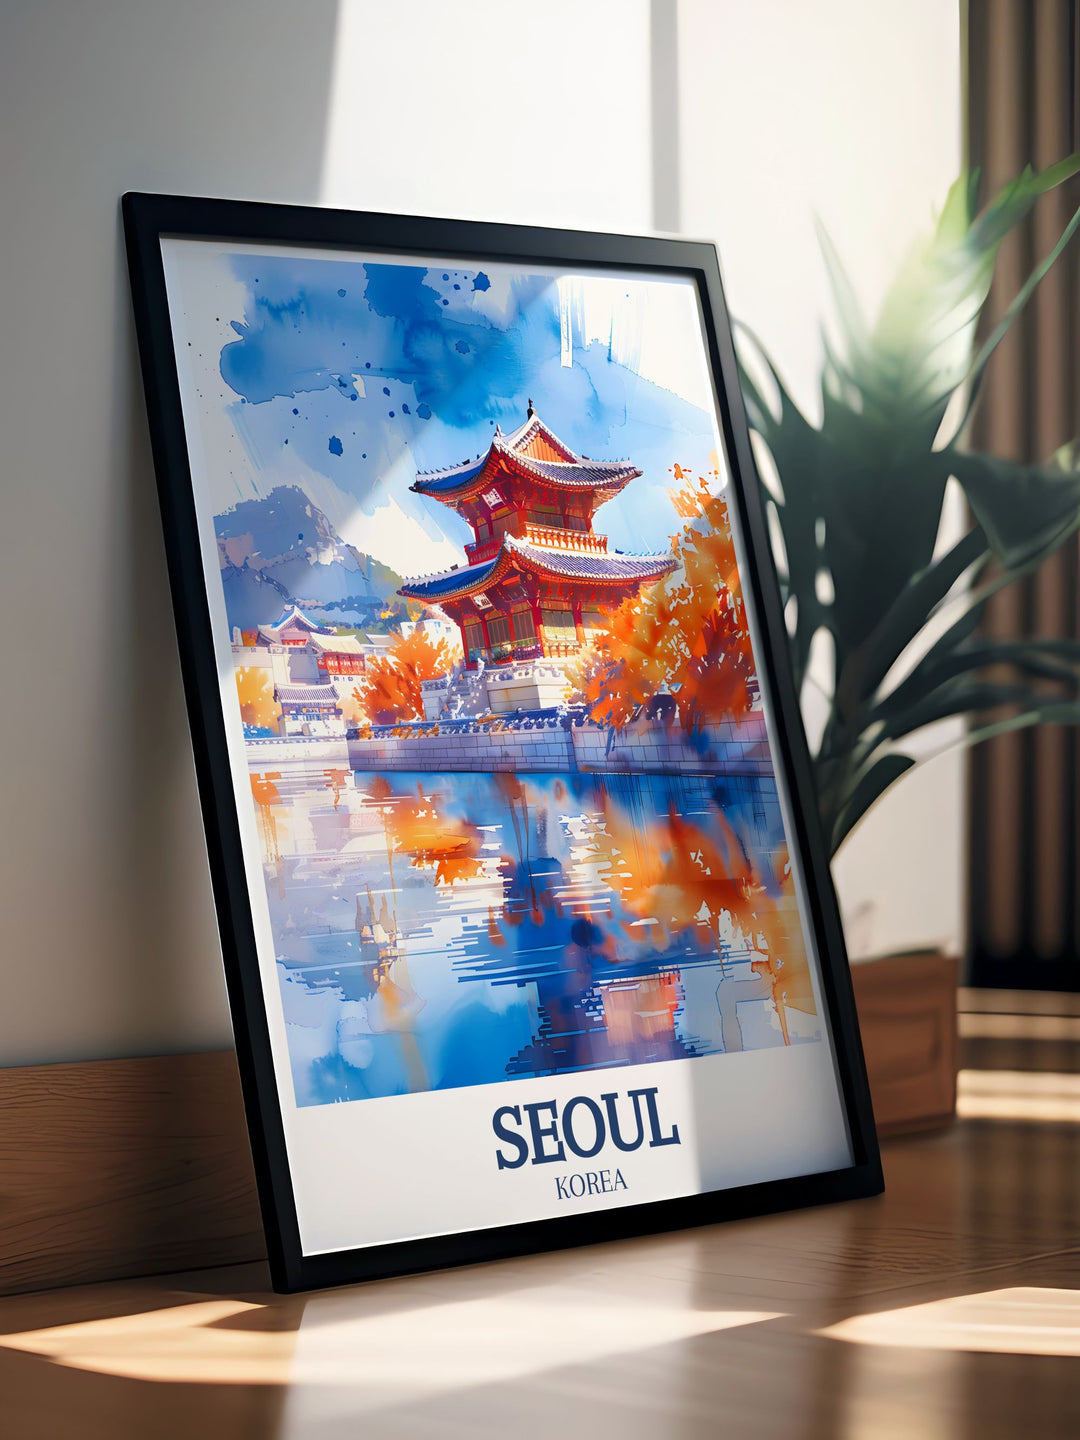 Gorgeous Seoul Art Print featuring Gyeongbokgung Palace and Han River perfect for adding a touch of elegance to your home decor these prints make wonderful traveler gifts capturing the spirit of Seoul